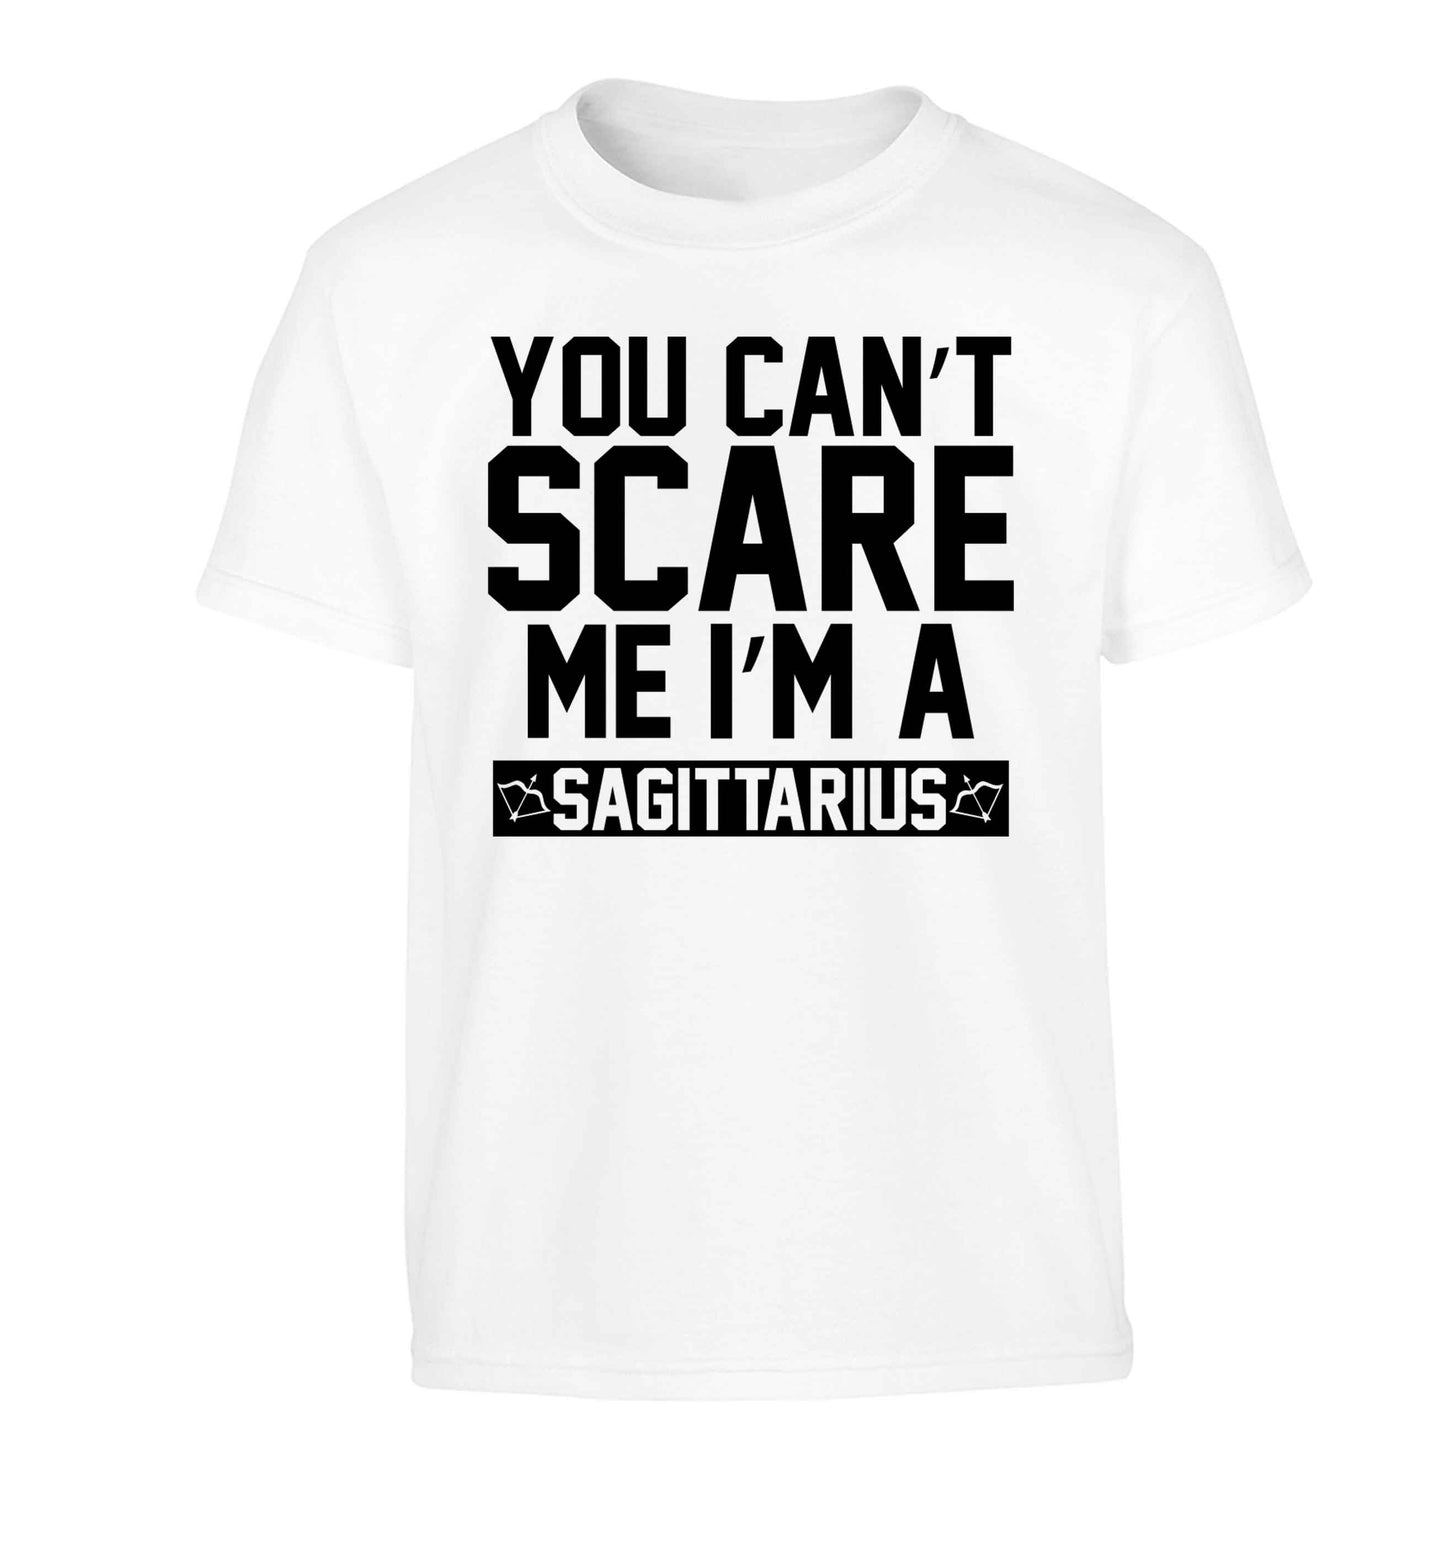 You can't scare me I'm a sagittarius Children's white Tshirt 12-13 Years